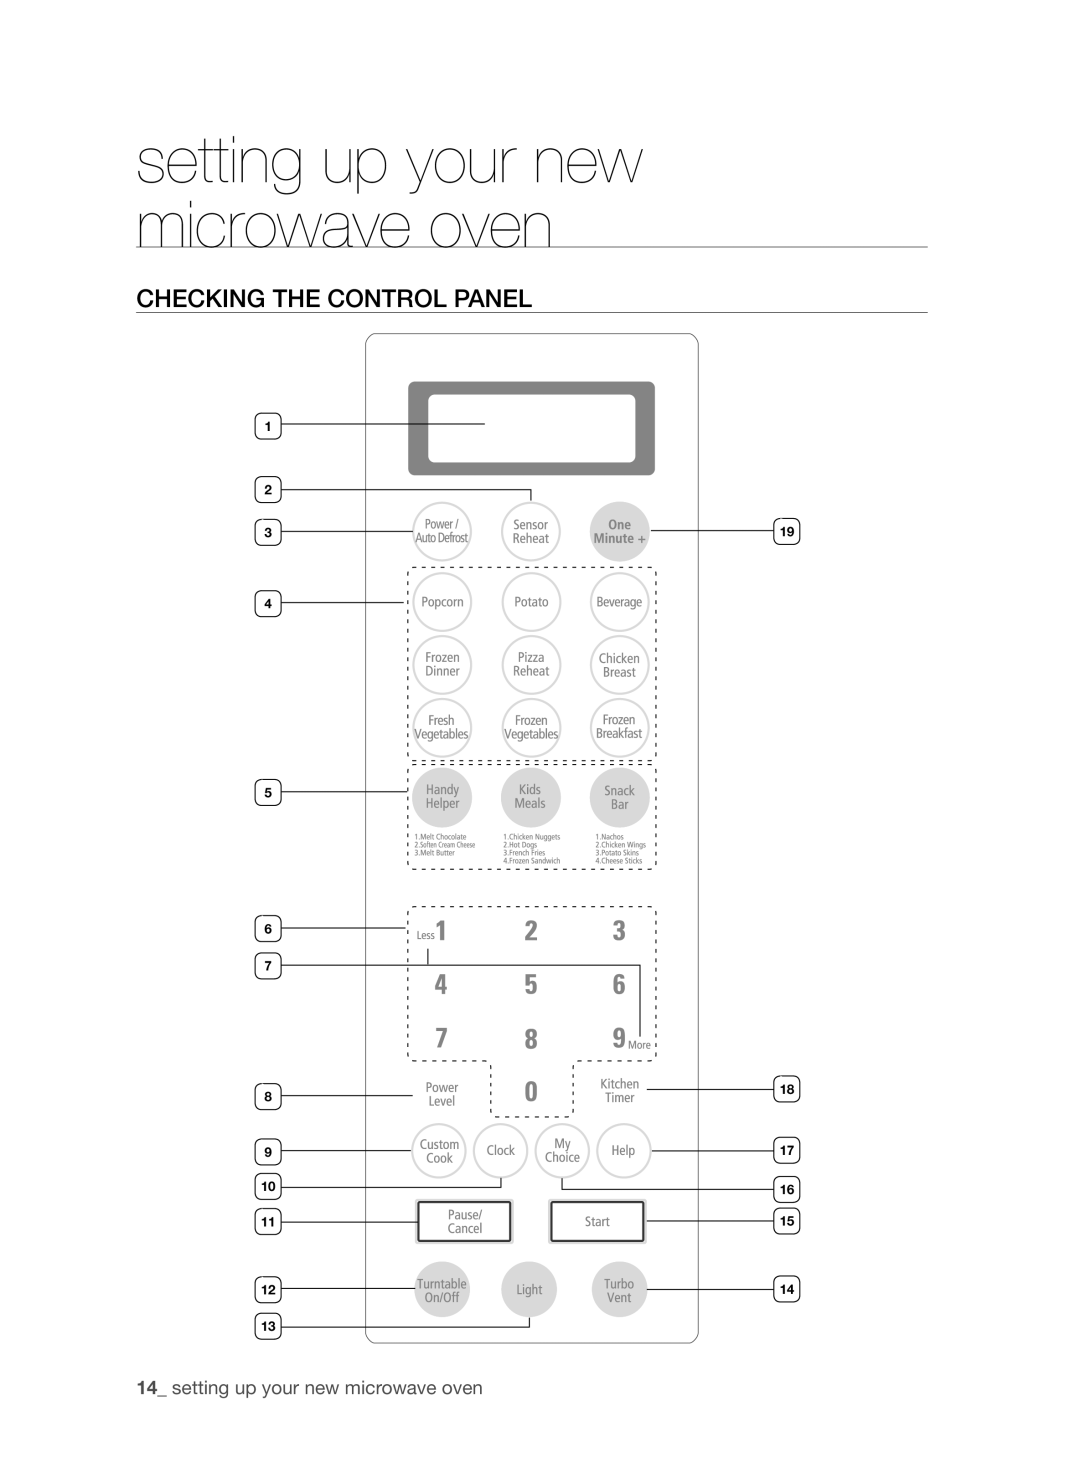 Samsung SMH7185 user manual Checking the control panel, setting up your new microwave oven 